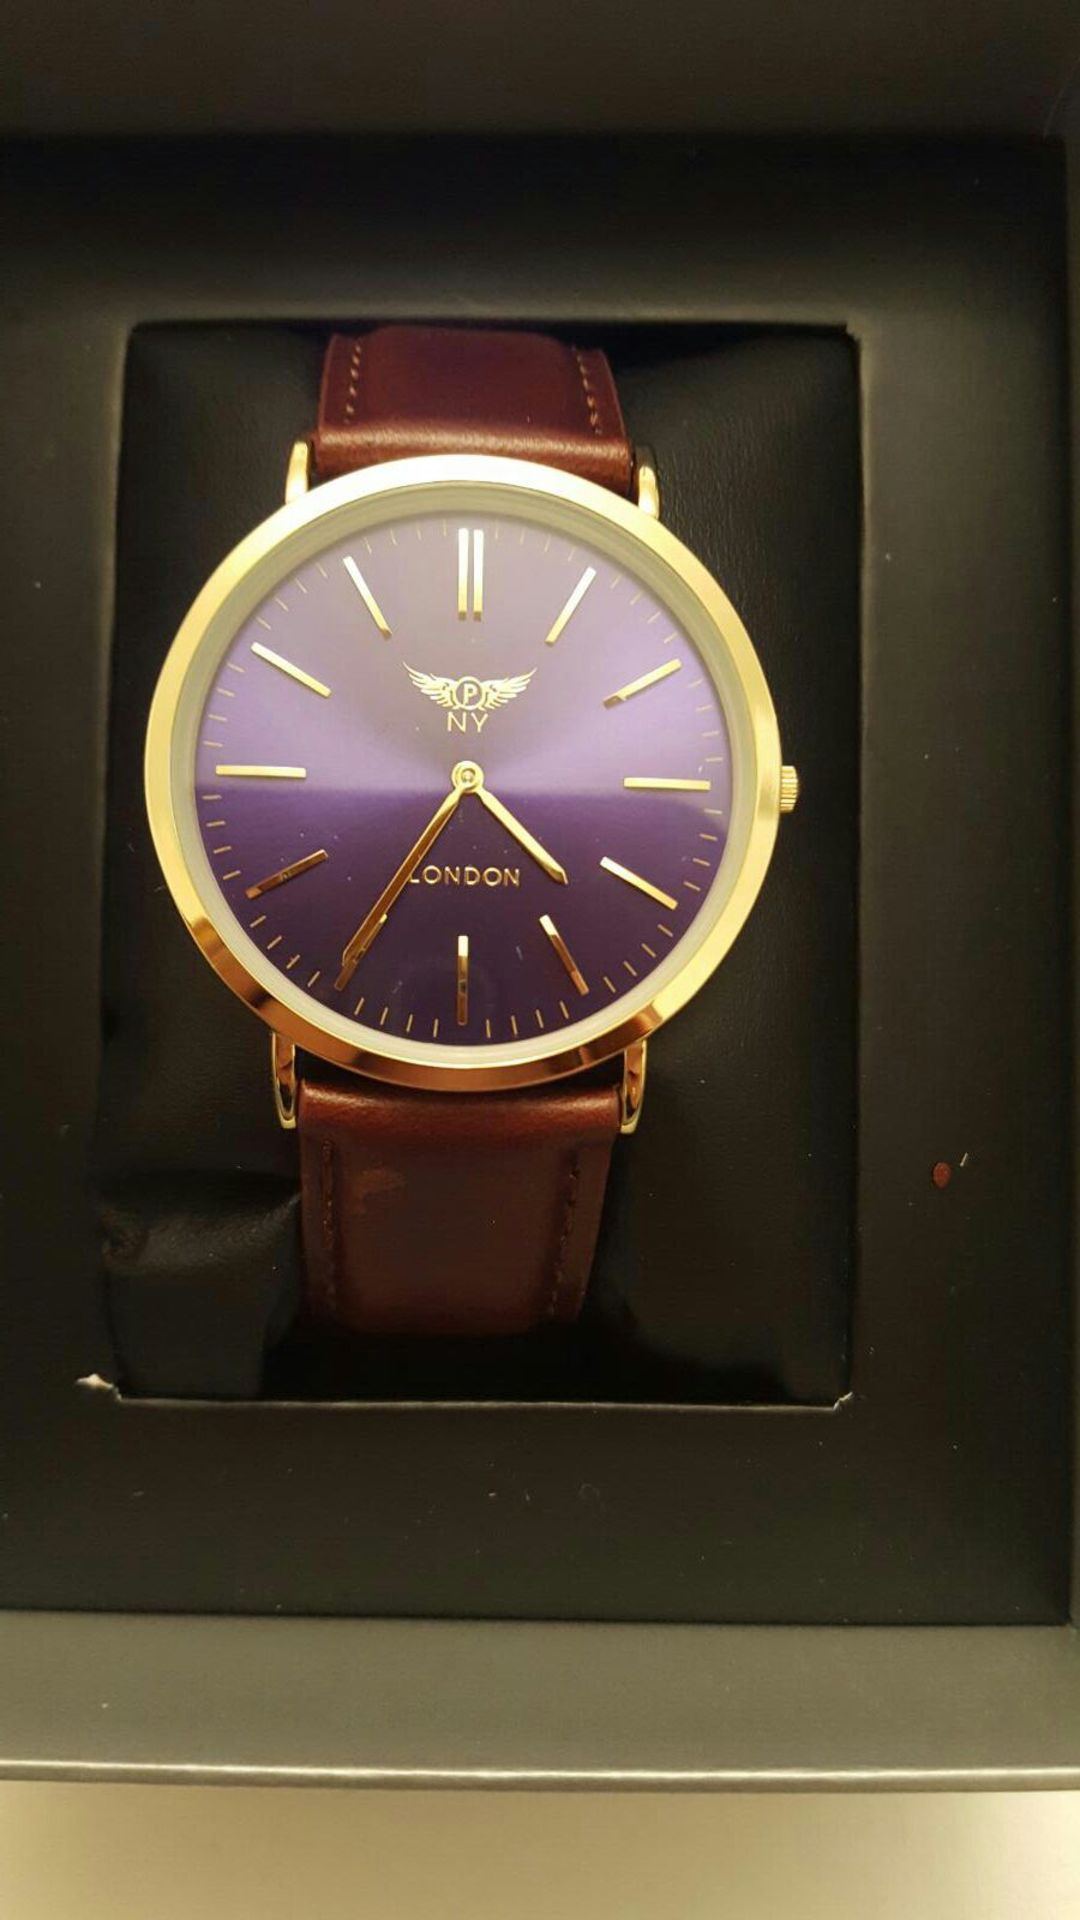 BRAND NEW NY LONDON GENTS SLIMLINE WATCH, GOLD WITH BLUE FACE AND TAN LEATHER STRAP, WITH ORIGINAL